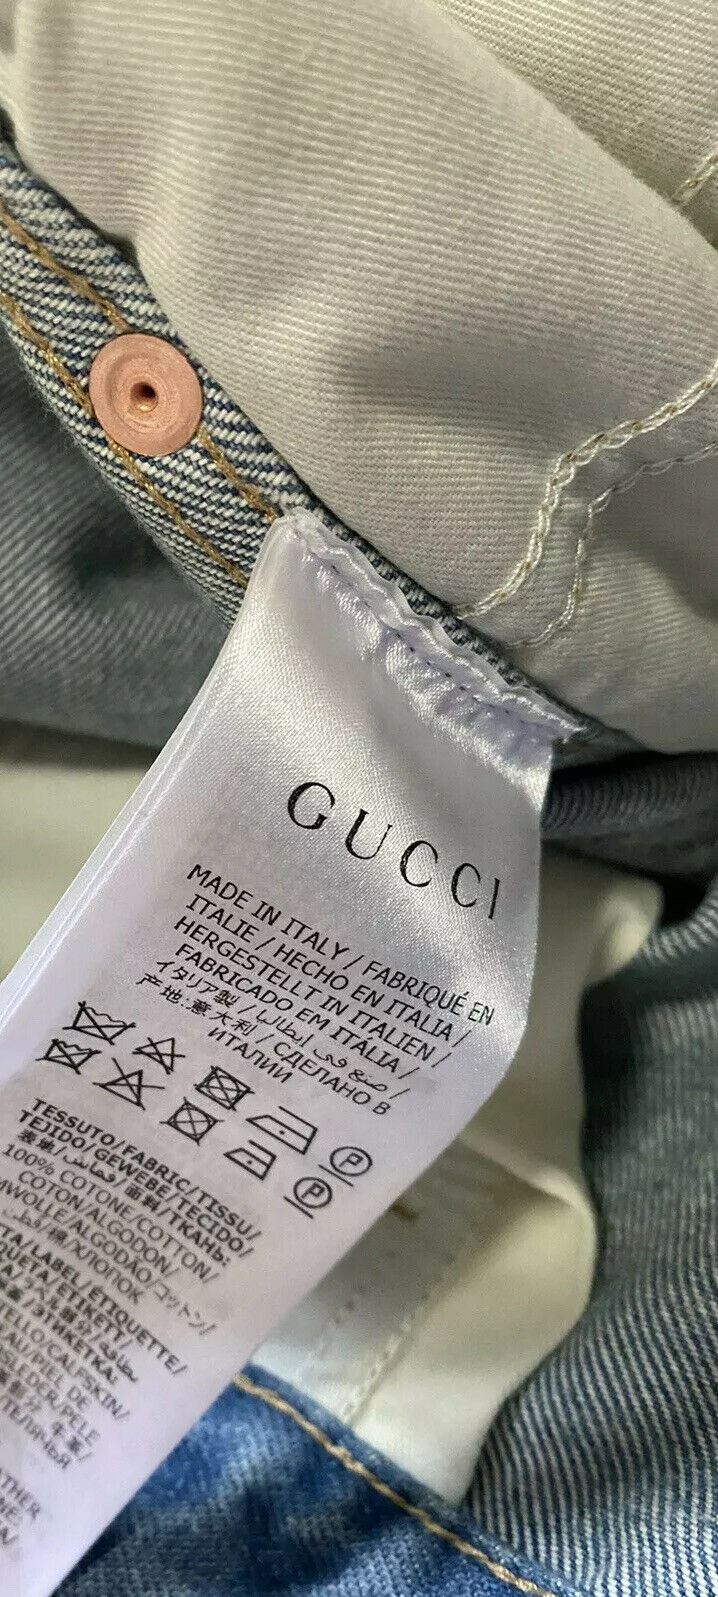 NWT $1450 Gucci Men’s Jeans Pants 34 US Italy